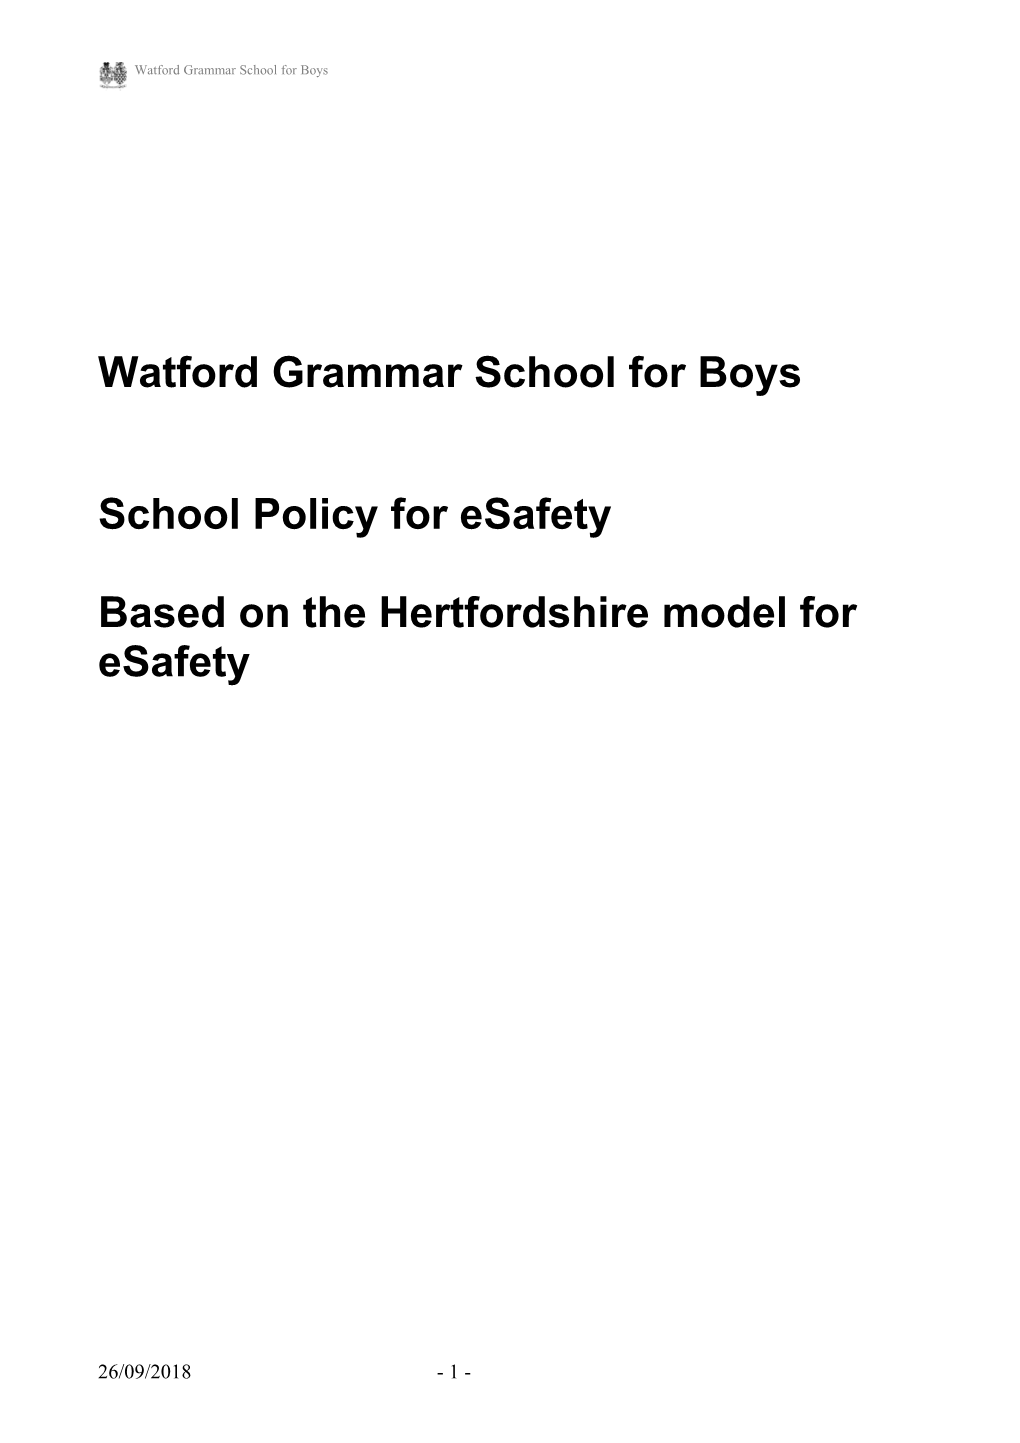 Acceptable Use Policy - Hertfordshire Model Esafety Policy